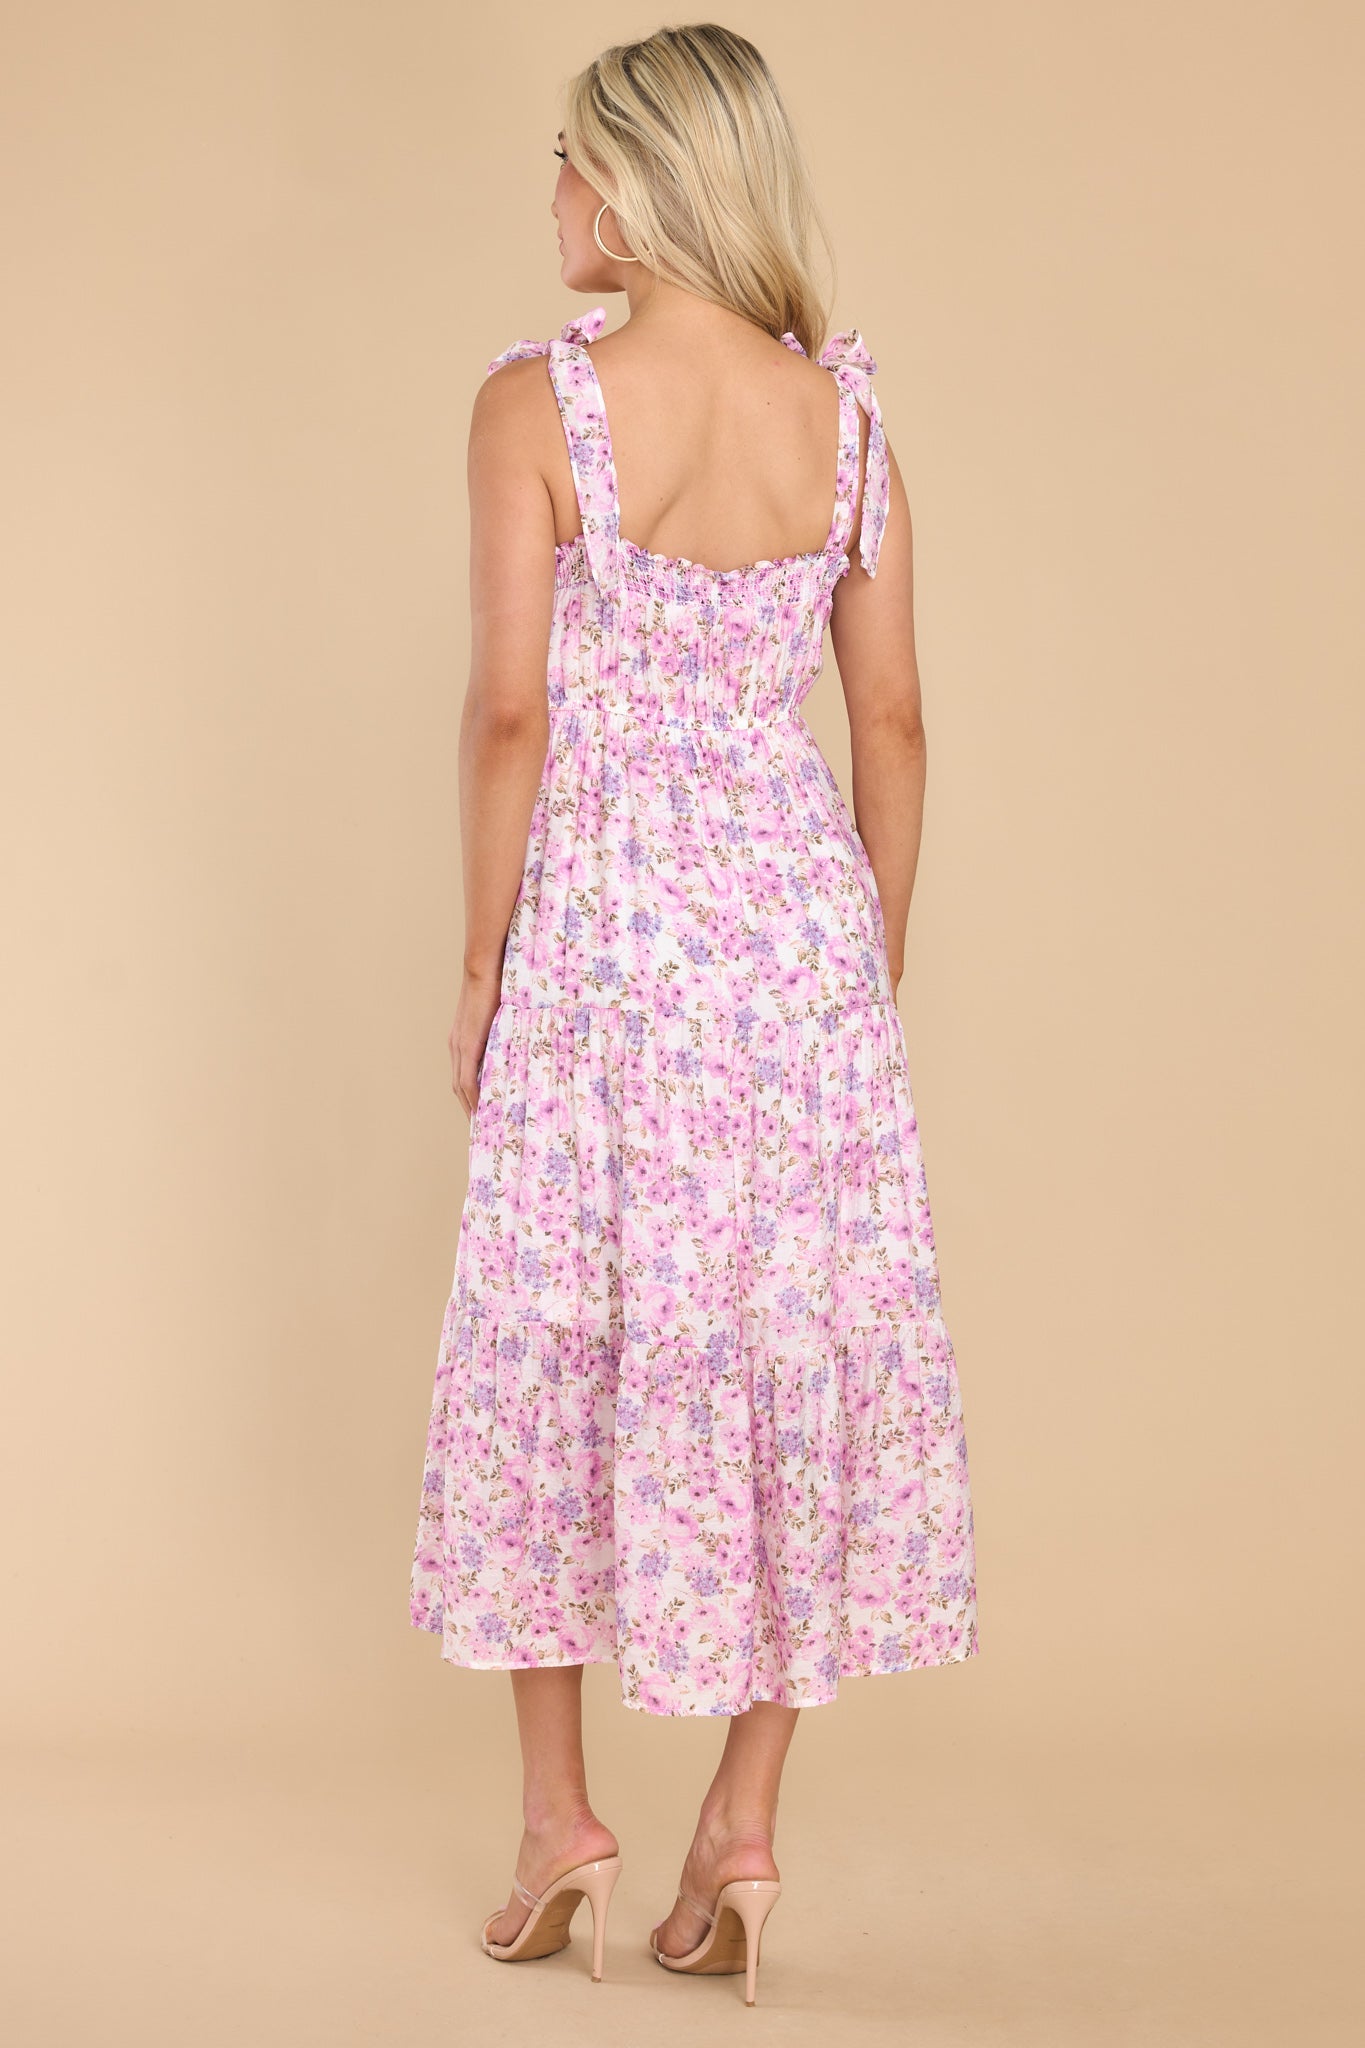 10 To You From Me Pink Floral Midi Dress at reddress.com